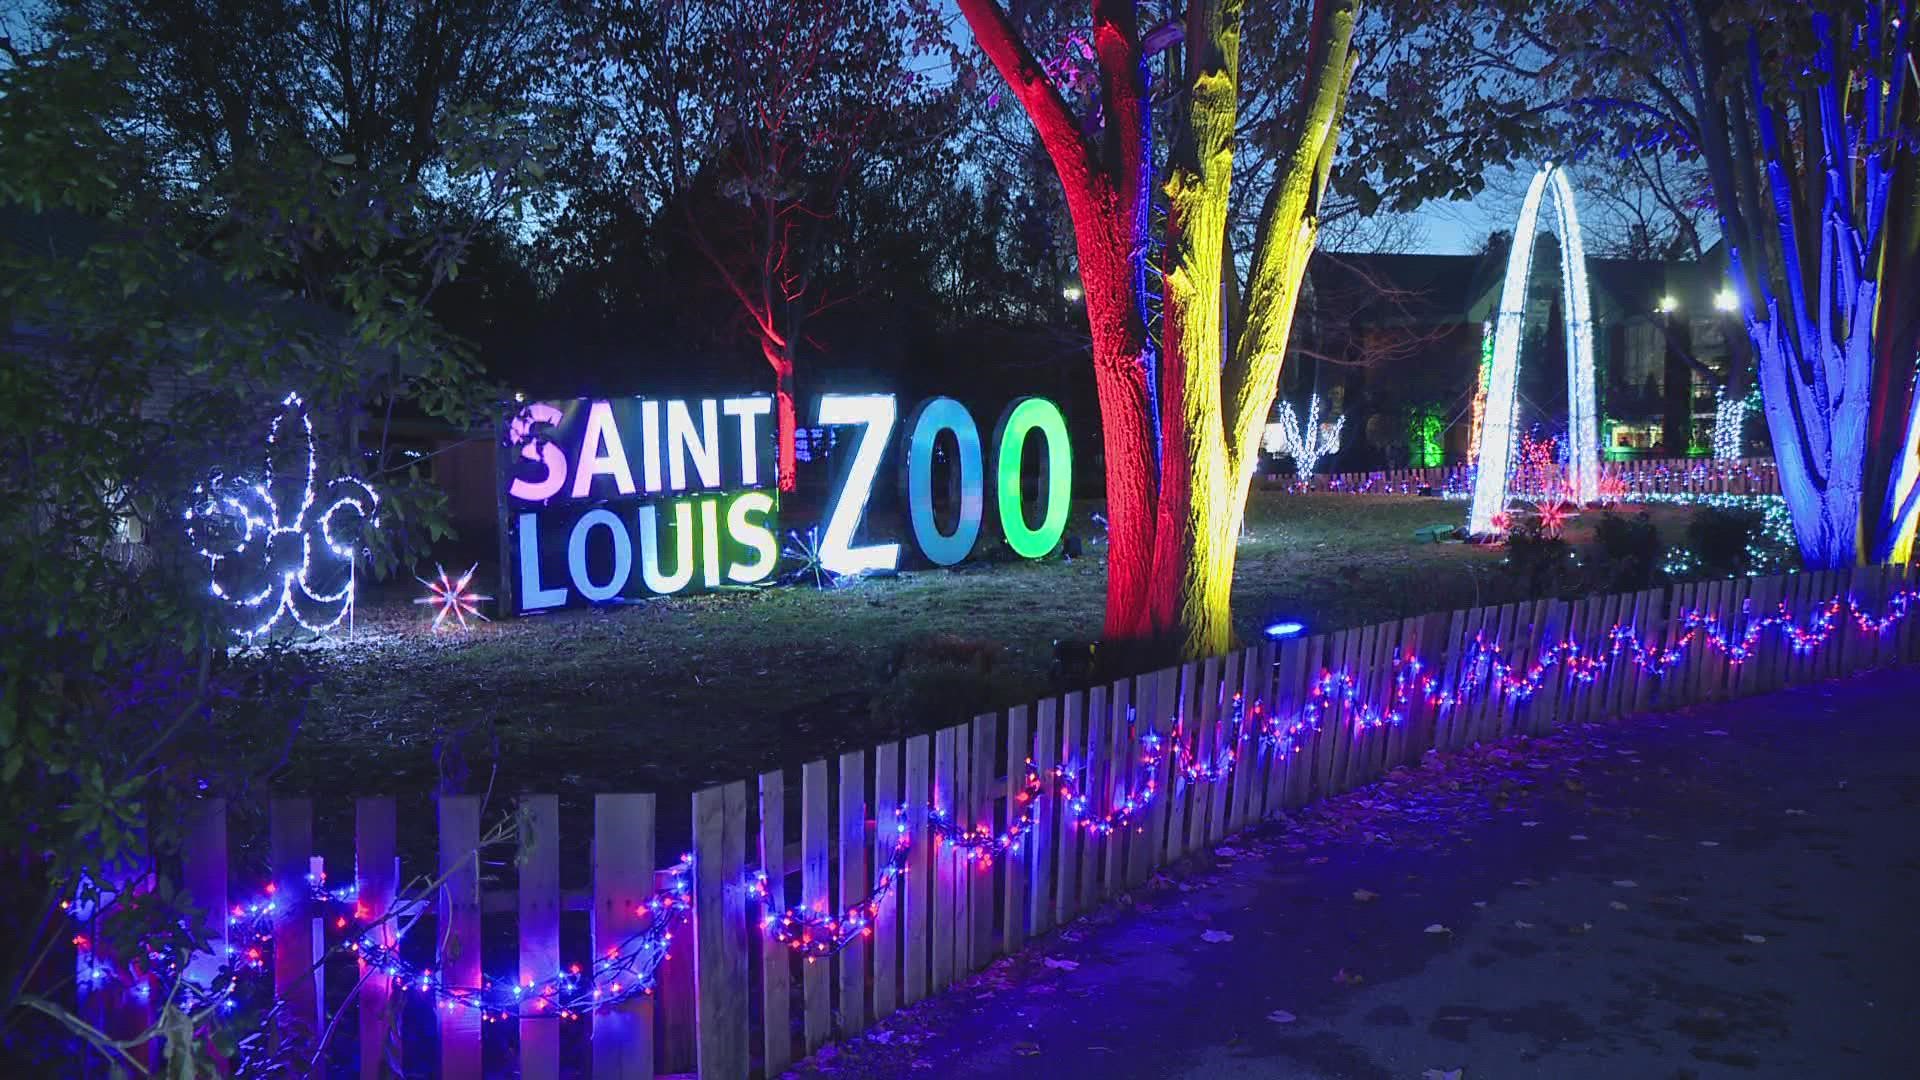 The Wild Lights display is now open at the Saint Louis Zoo. Tickets are available to purchase and the lights are open till Dec. 30.